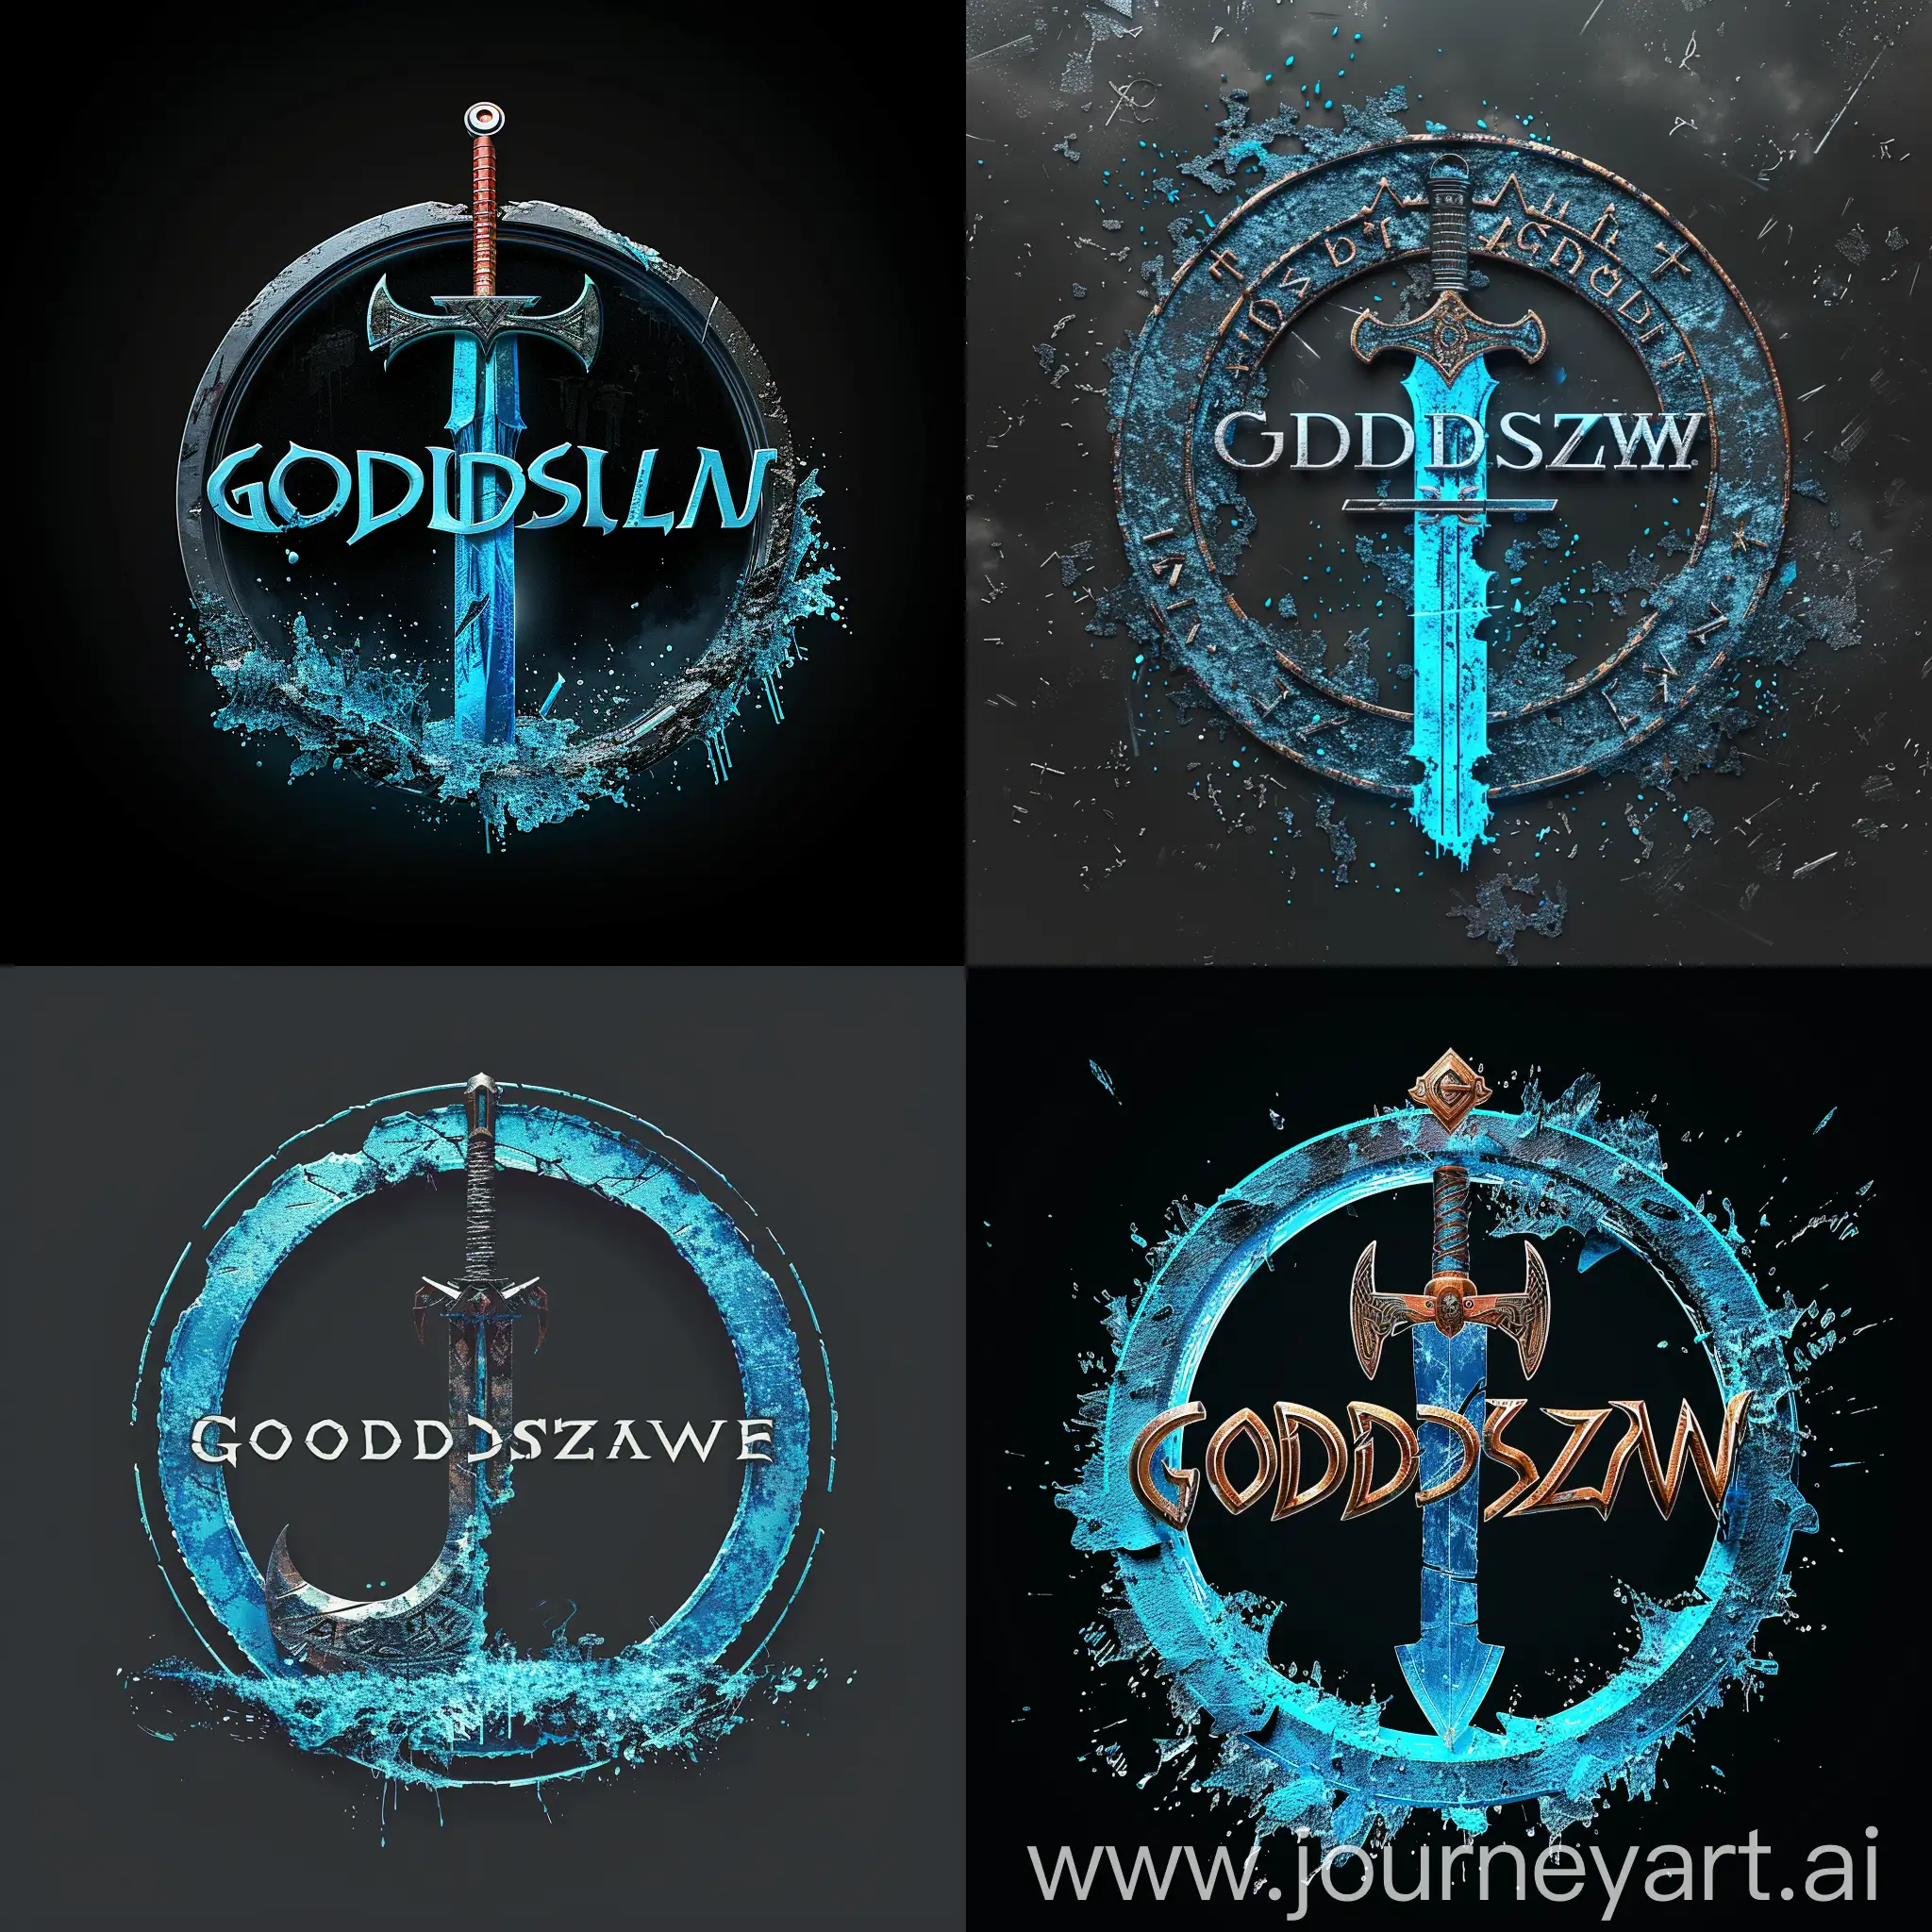 Come up with a logo for an FPS videogame about killing Nordic gods, called "Godslayer". Be inspired by the Fallout videogame franchise logo or the Elder Scrolls videogame logo. Have a futuristic viking sword infused with blue resin go through the text, and the bottom of the circle should be deteriorating.